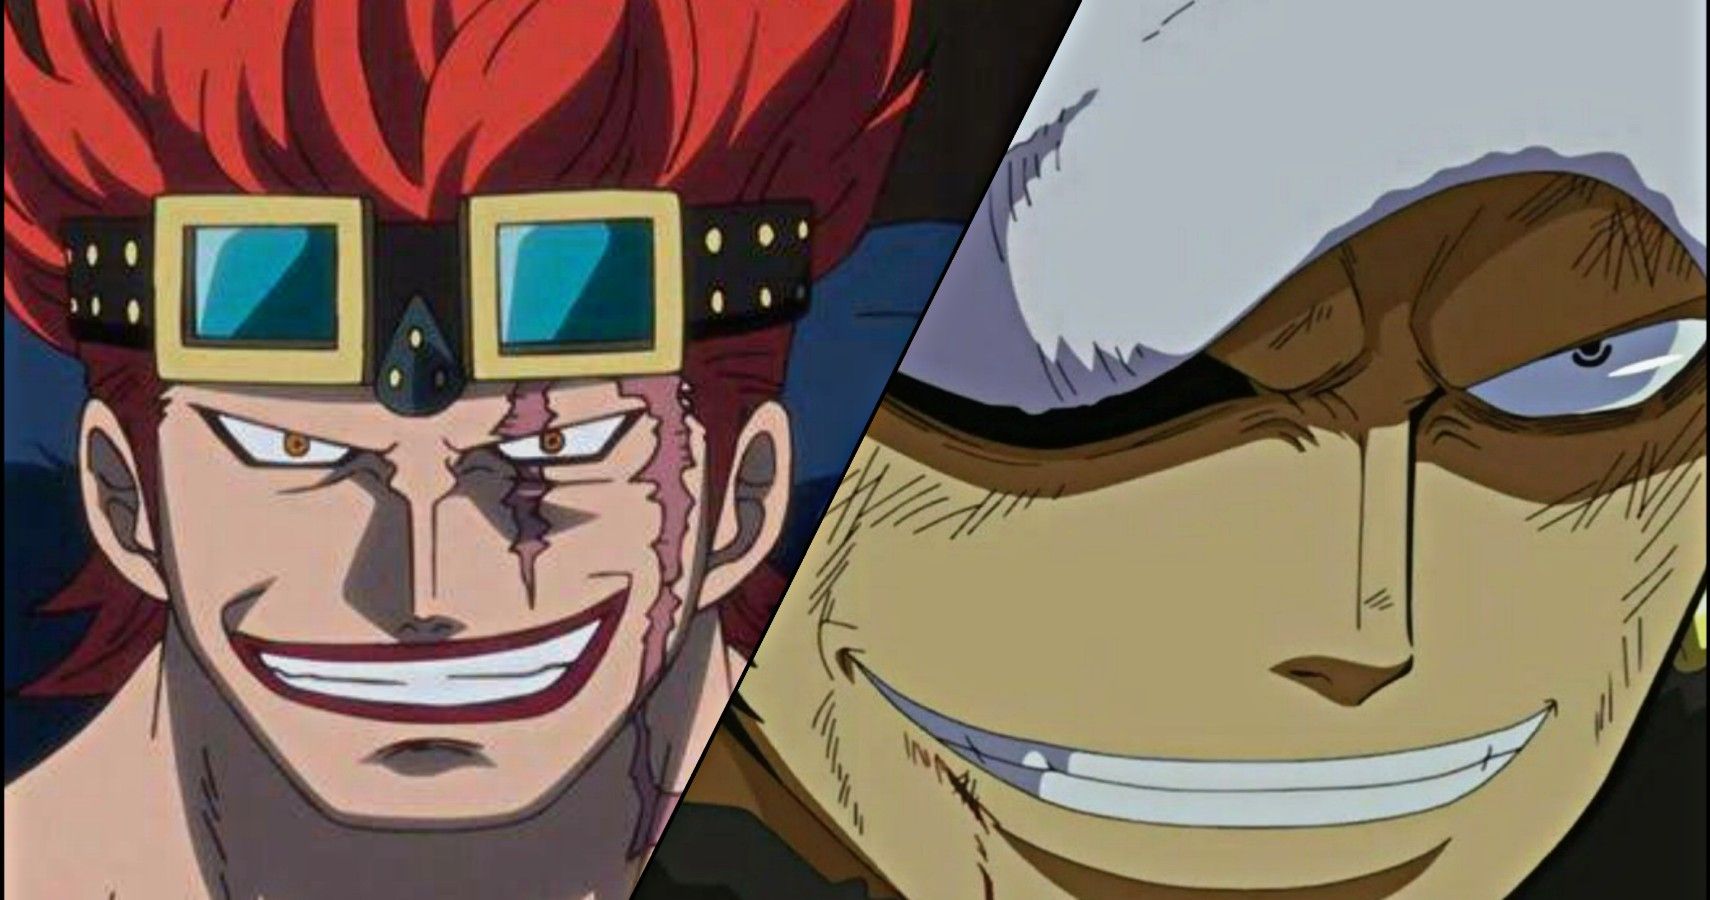 Who is a better swordman, Zoro or Yami? - Quora